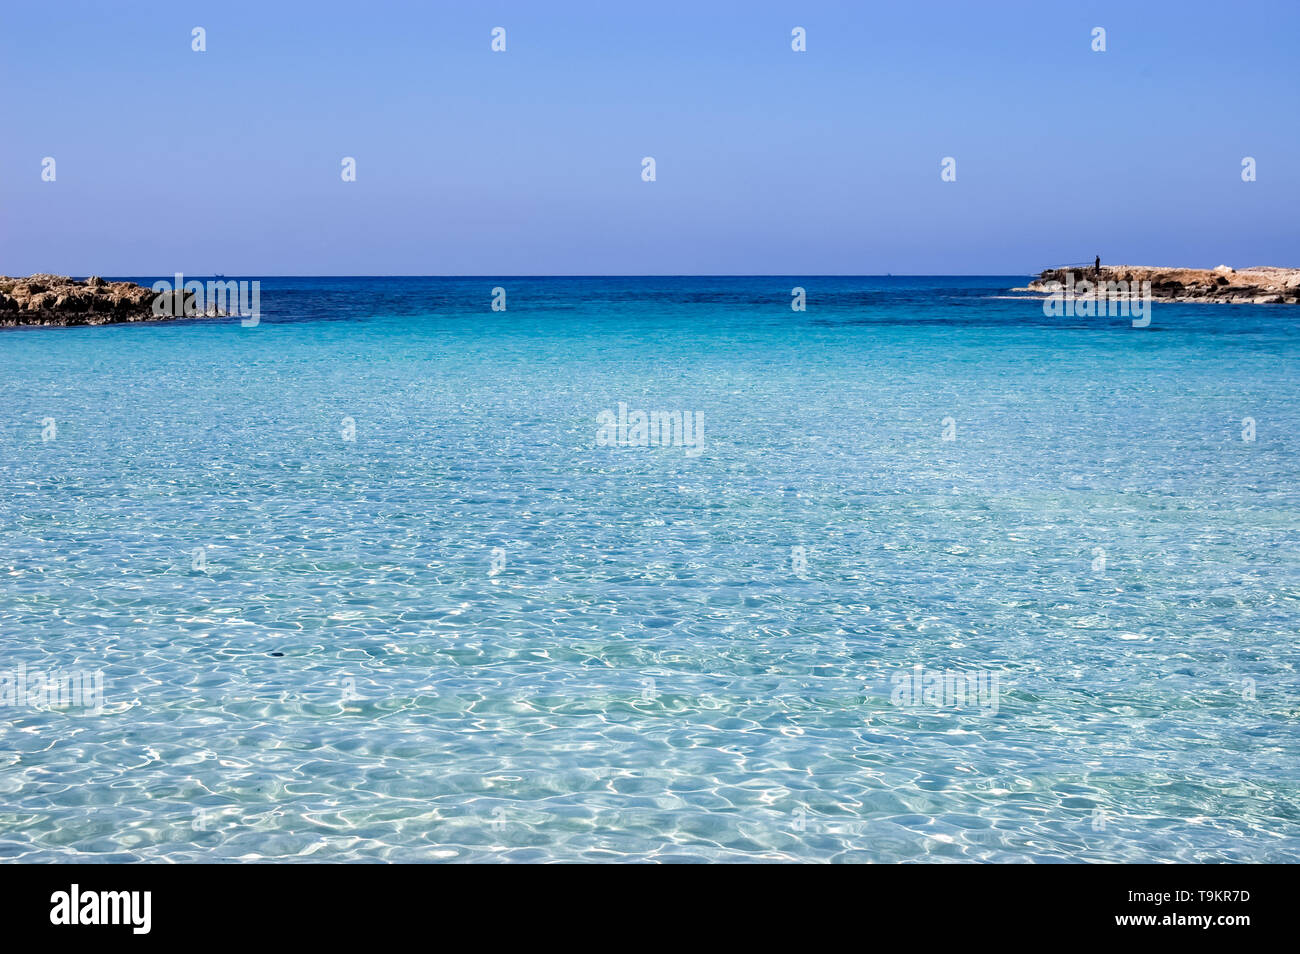 Panoramic sea landscape with blue transparent sea in the resort of Ayia Napa, Cyprus. Stock Photo